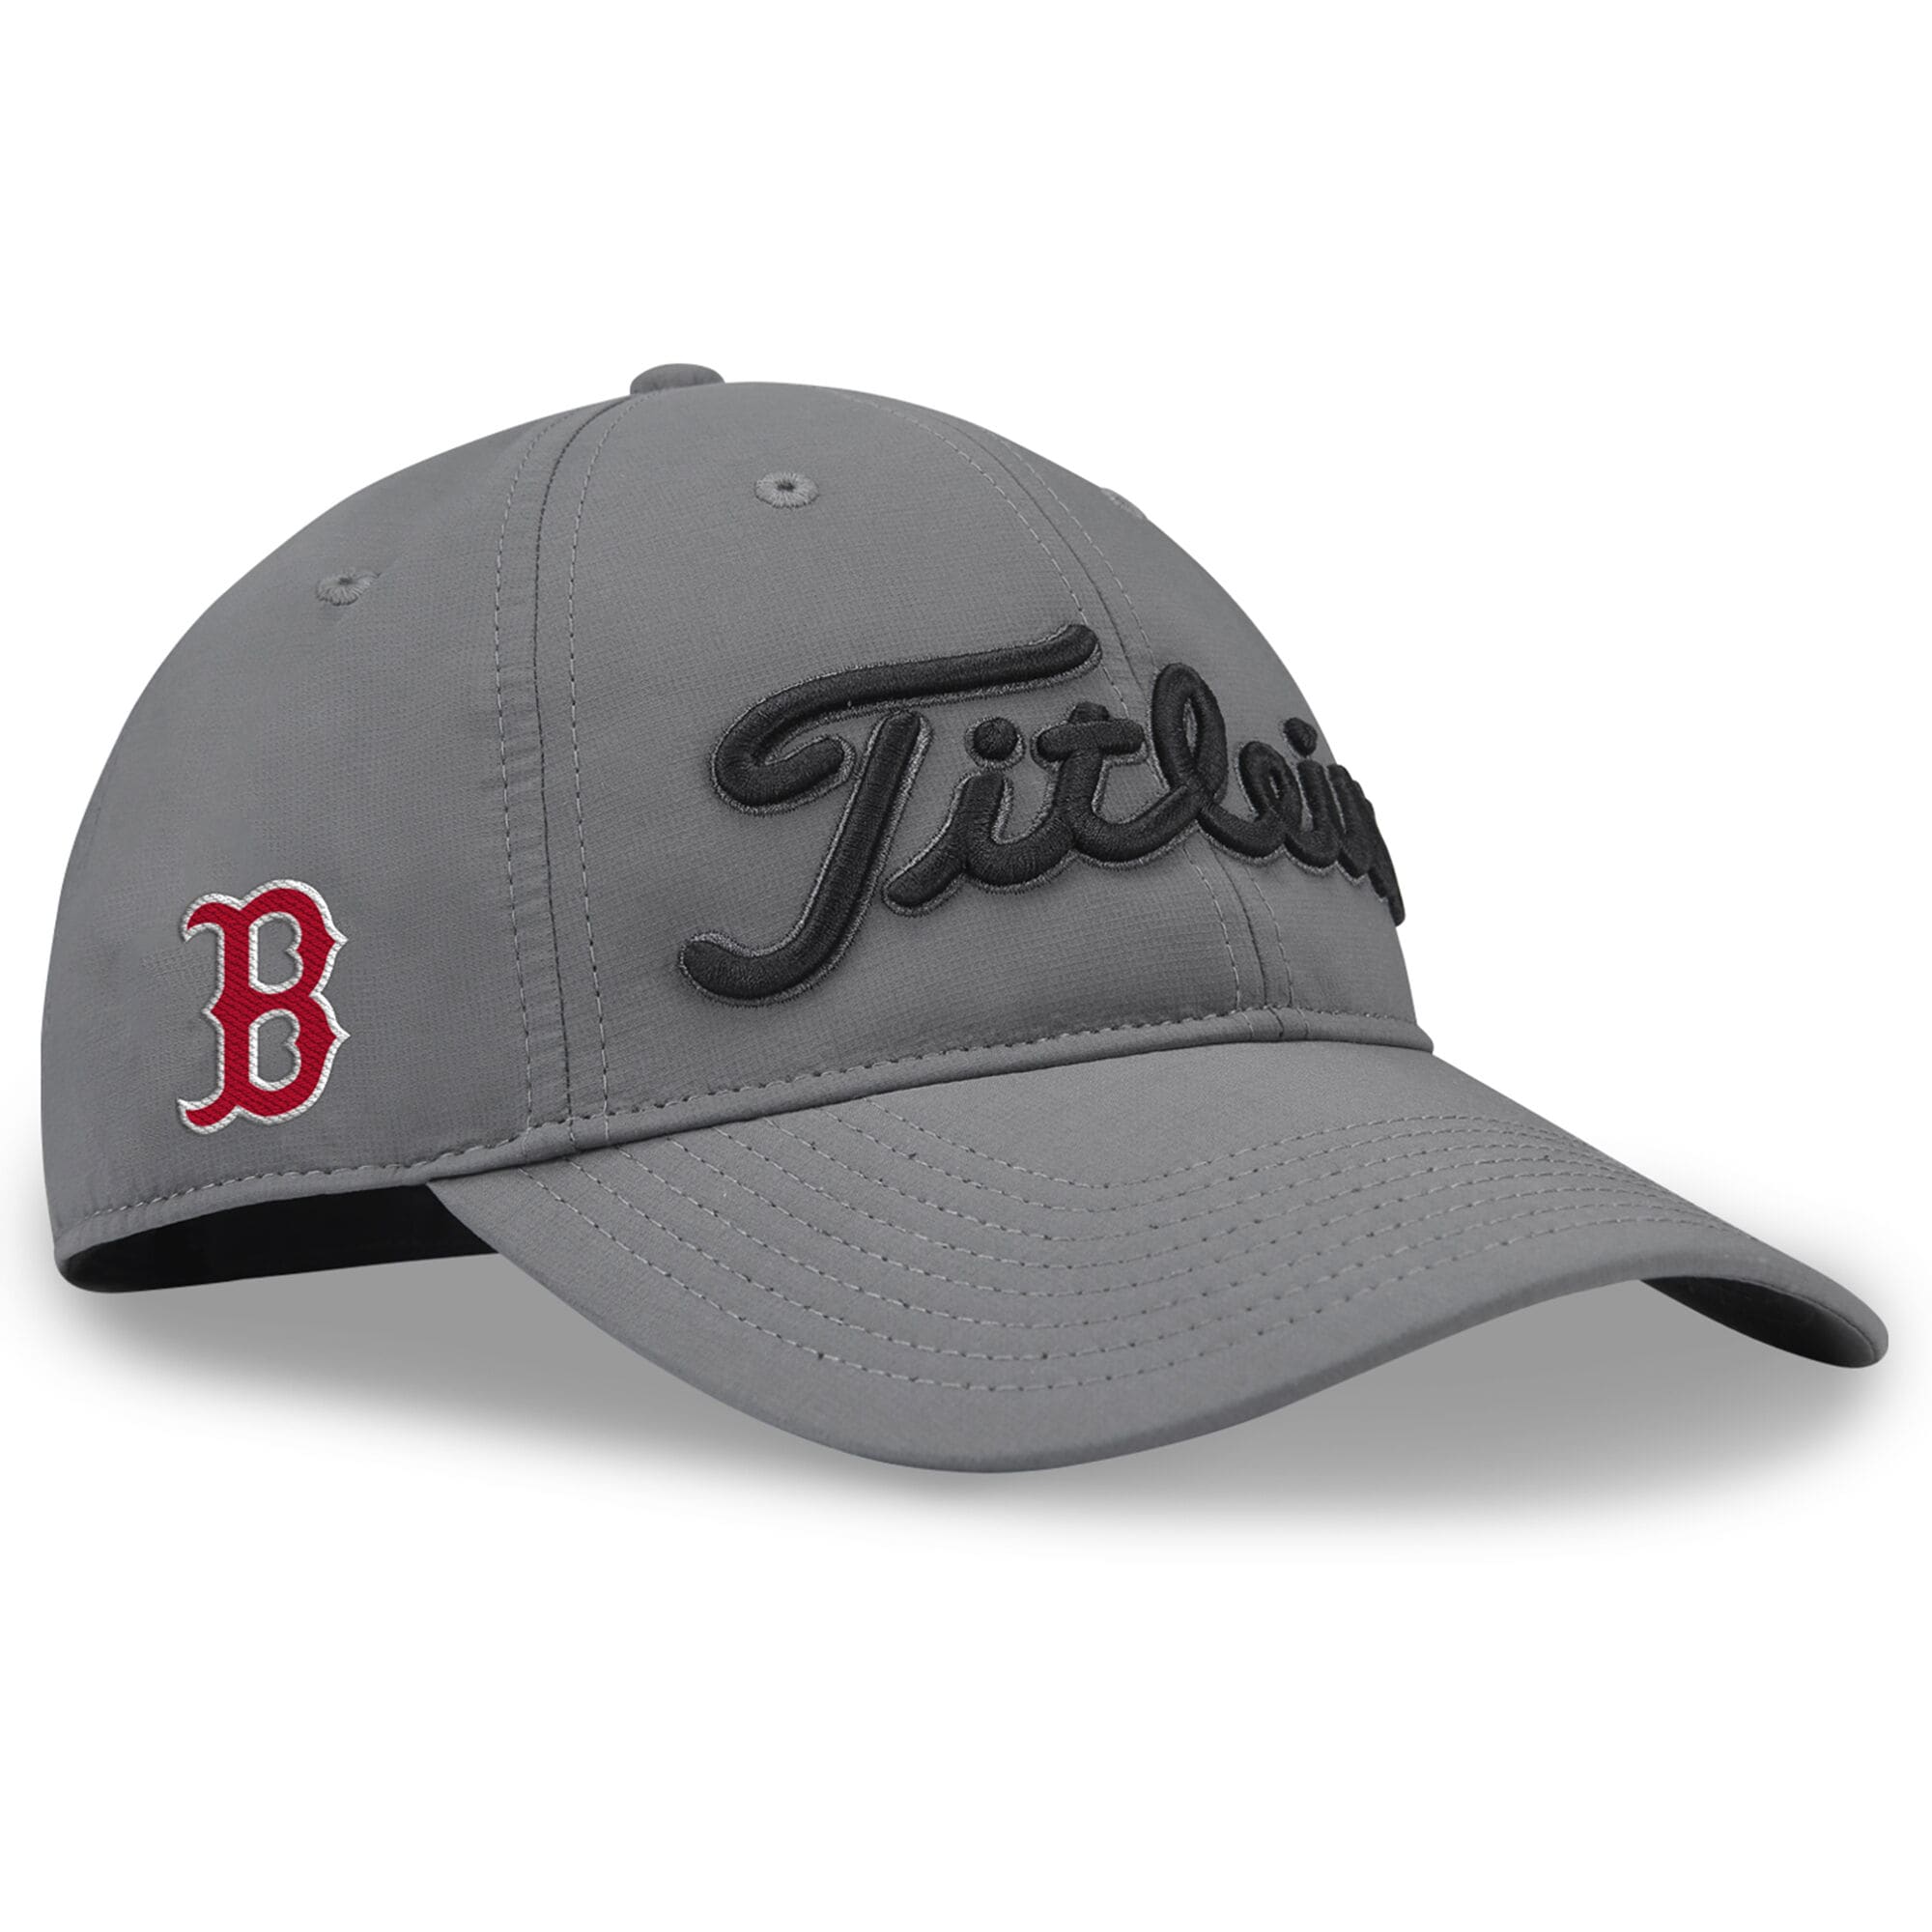 2018 red sox championship hat